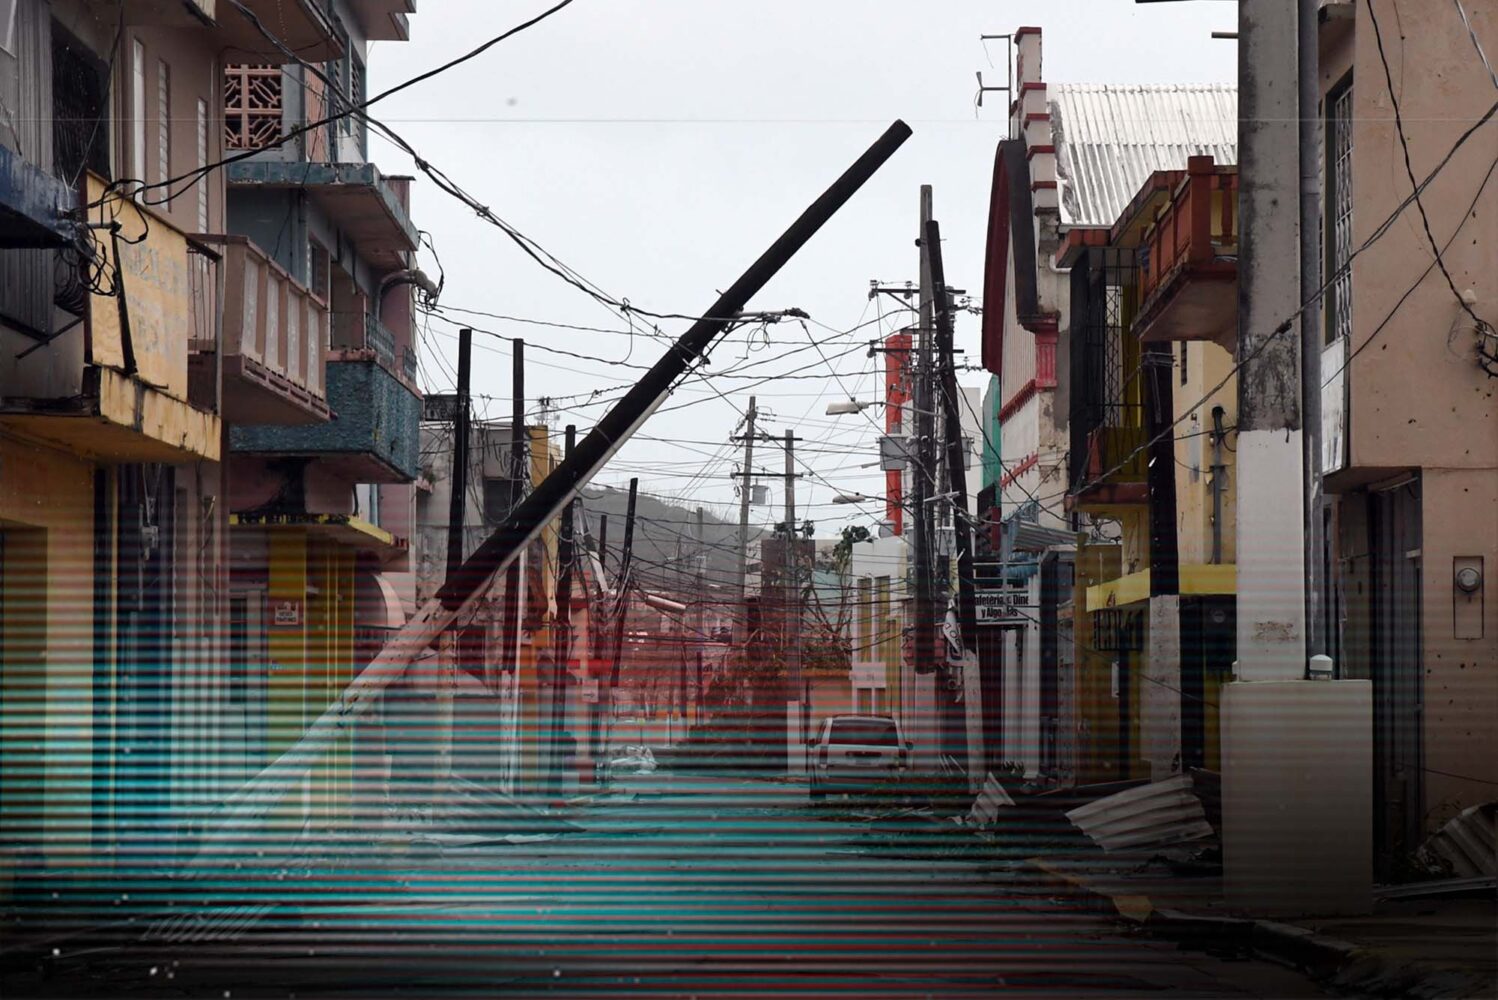 Photo: A picture of a town that has been hit by a hurricane. There is a telephone pole leaning into the street and debris around. There is a glitch overlay on the image